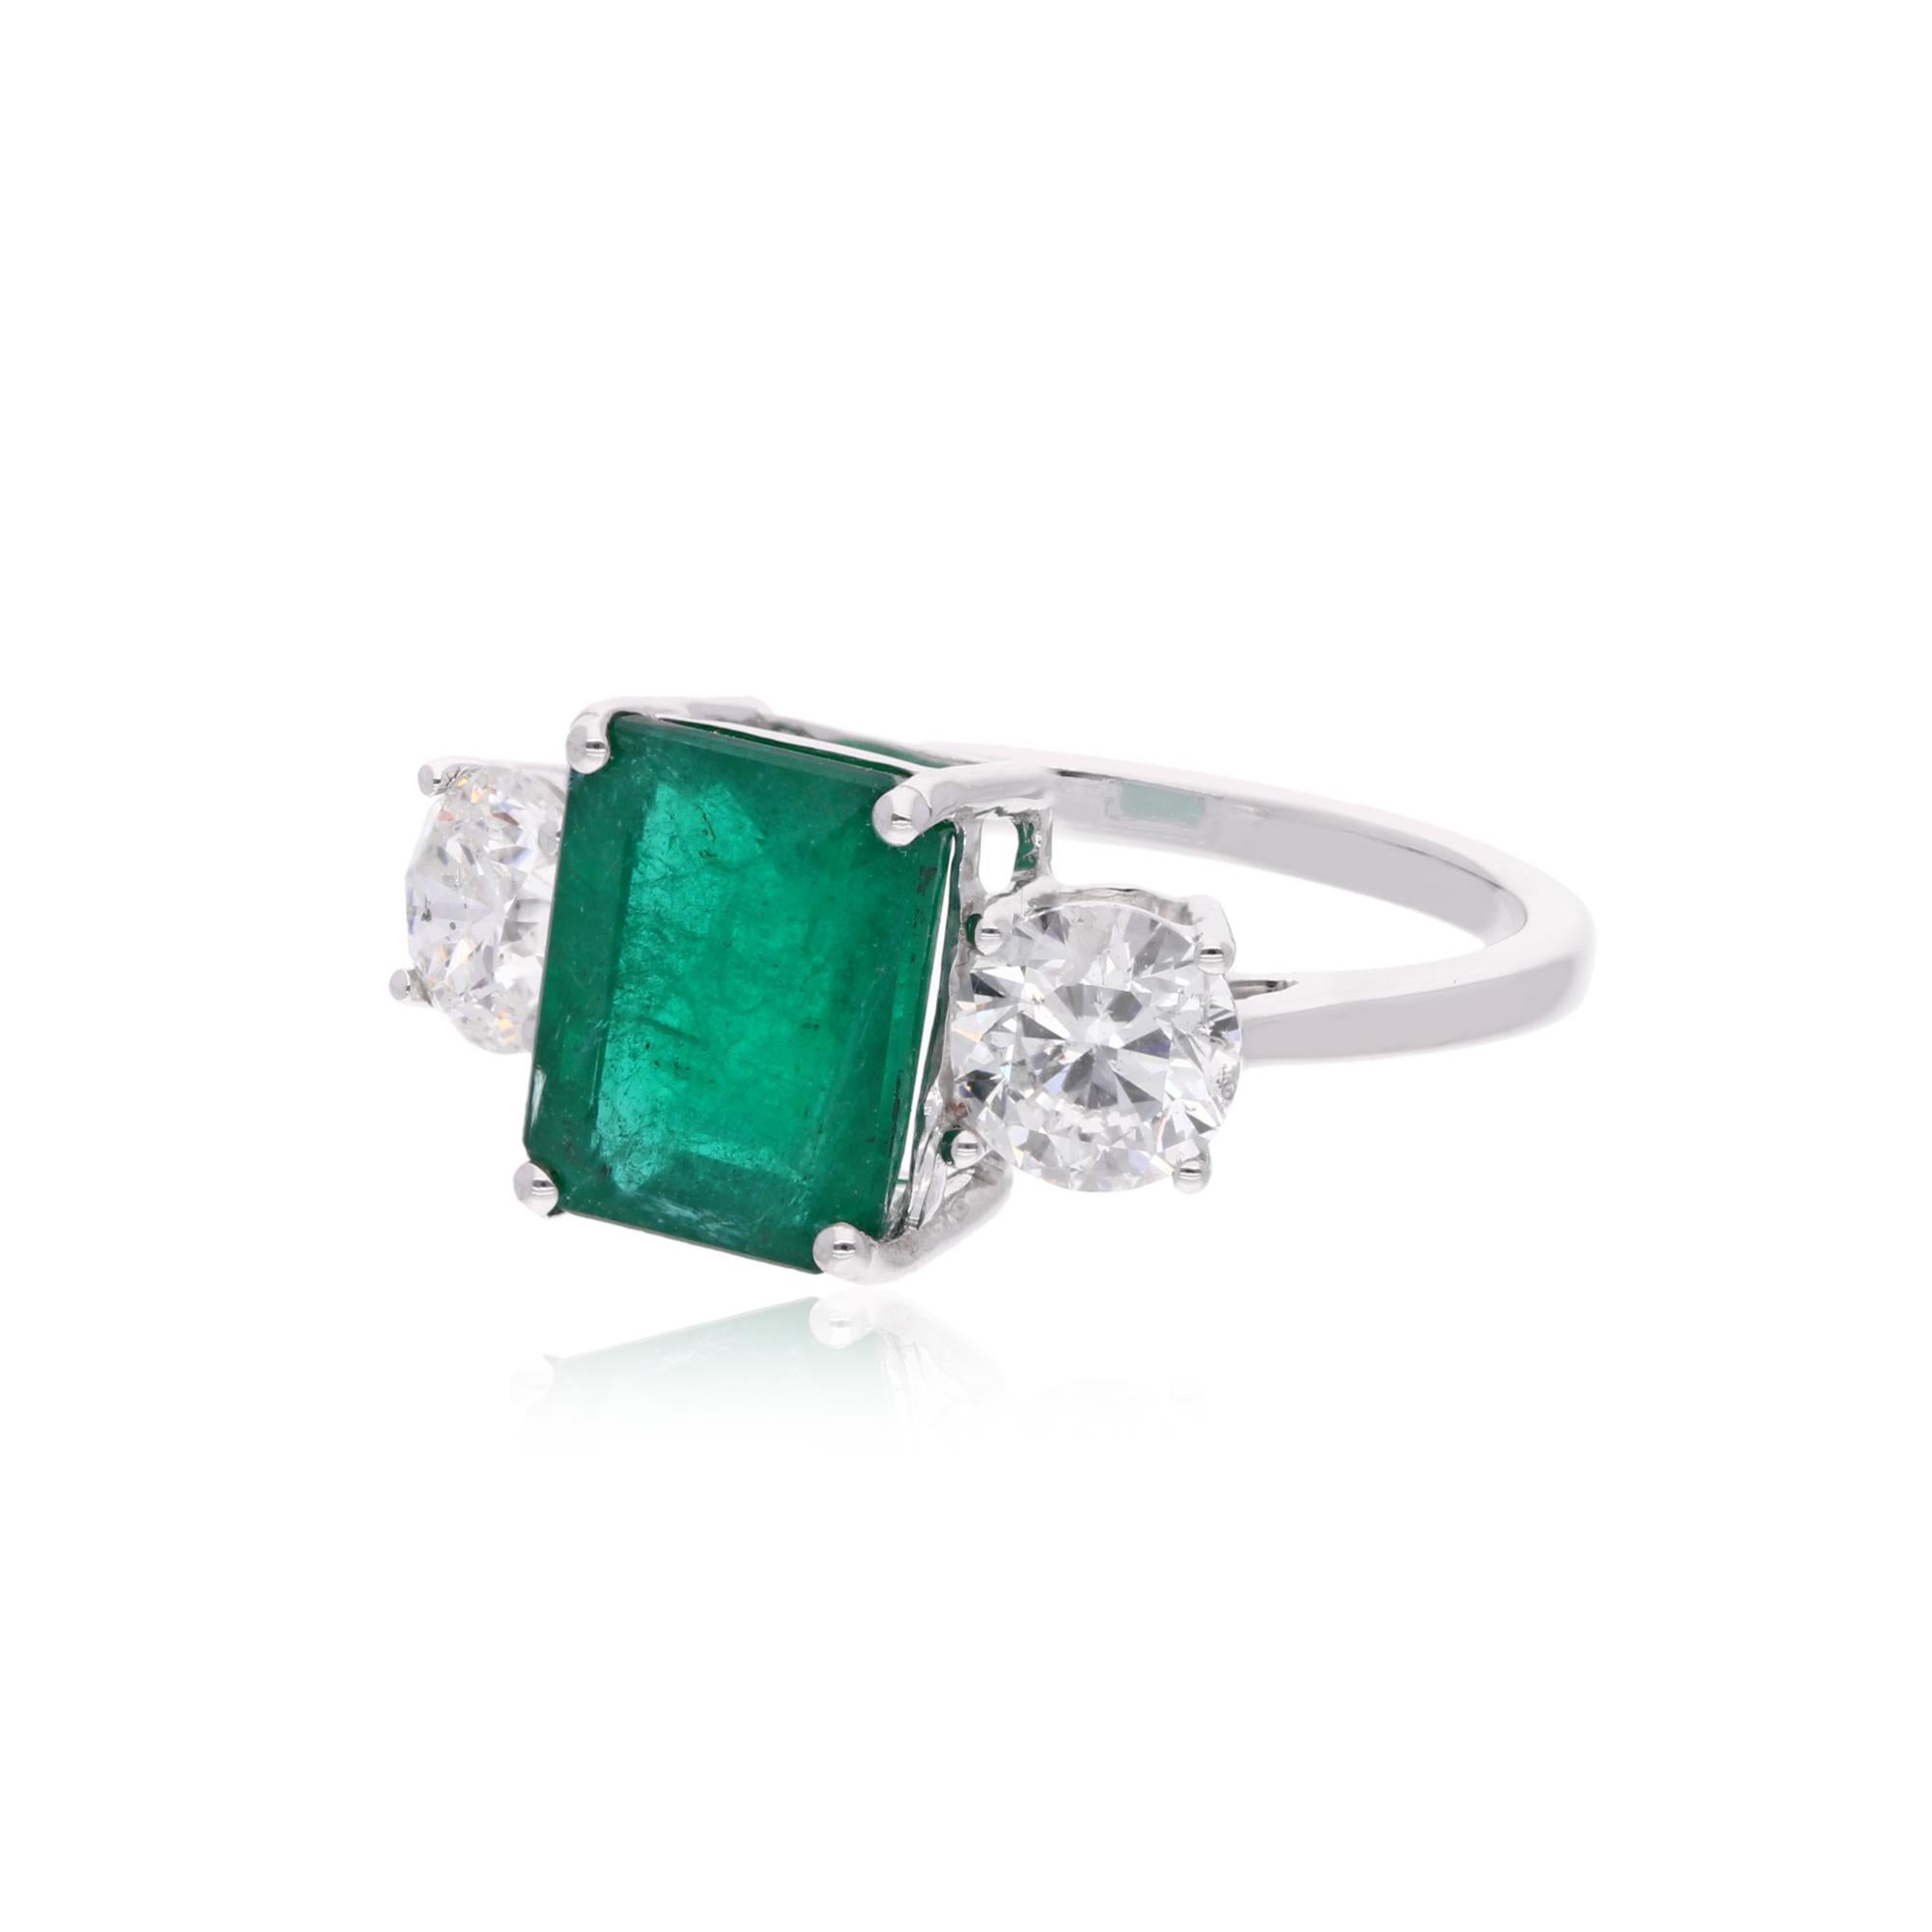 Item Code :- SER-22377
Gross Wt. :- 3.93 gm
18k White Gold Wt. :- 2.98 gm
Natural Diamond Wt. :- 1.42 Ct. ( AVERAGE DIAMOND CLARITY SI1-SI2 & COLOR H-I )
Zambian Emerald Wt. :- 3.35 Ct.
Ring Size :- 7 US & All size available

✦